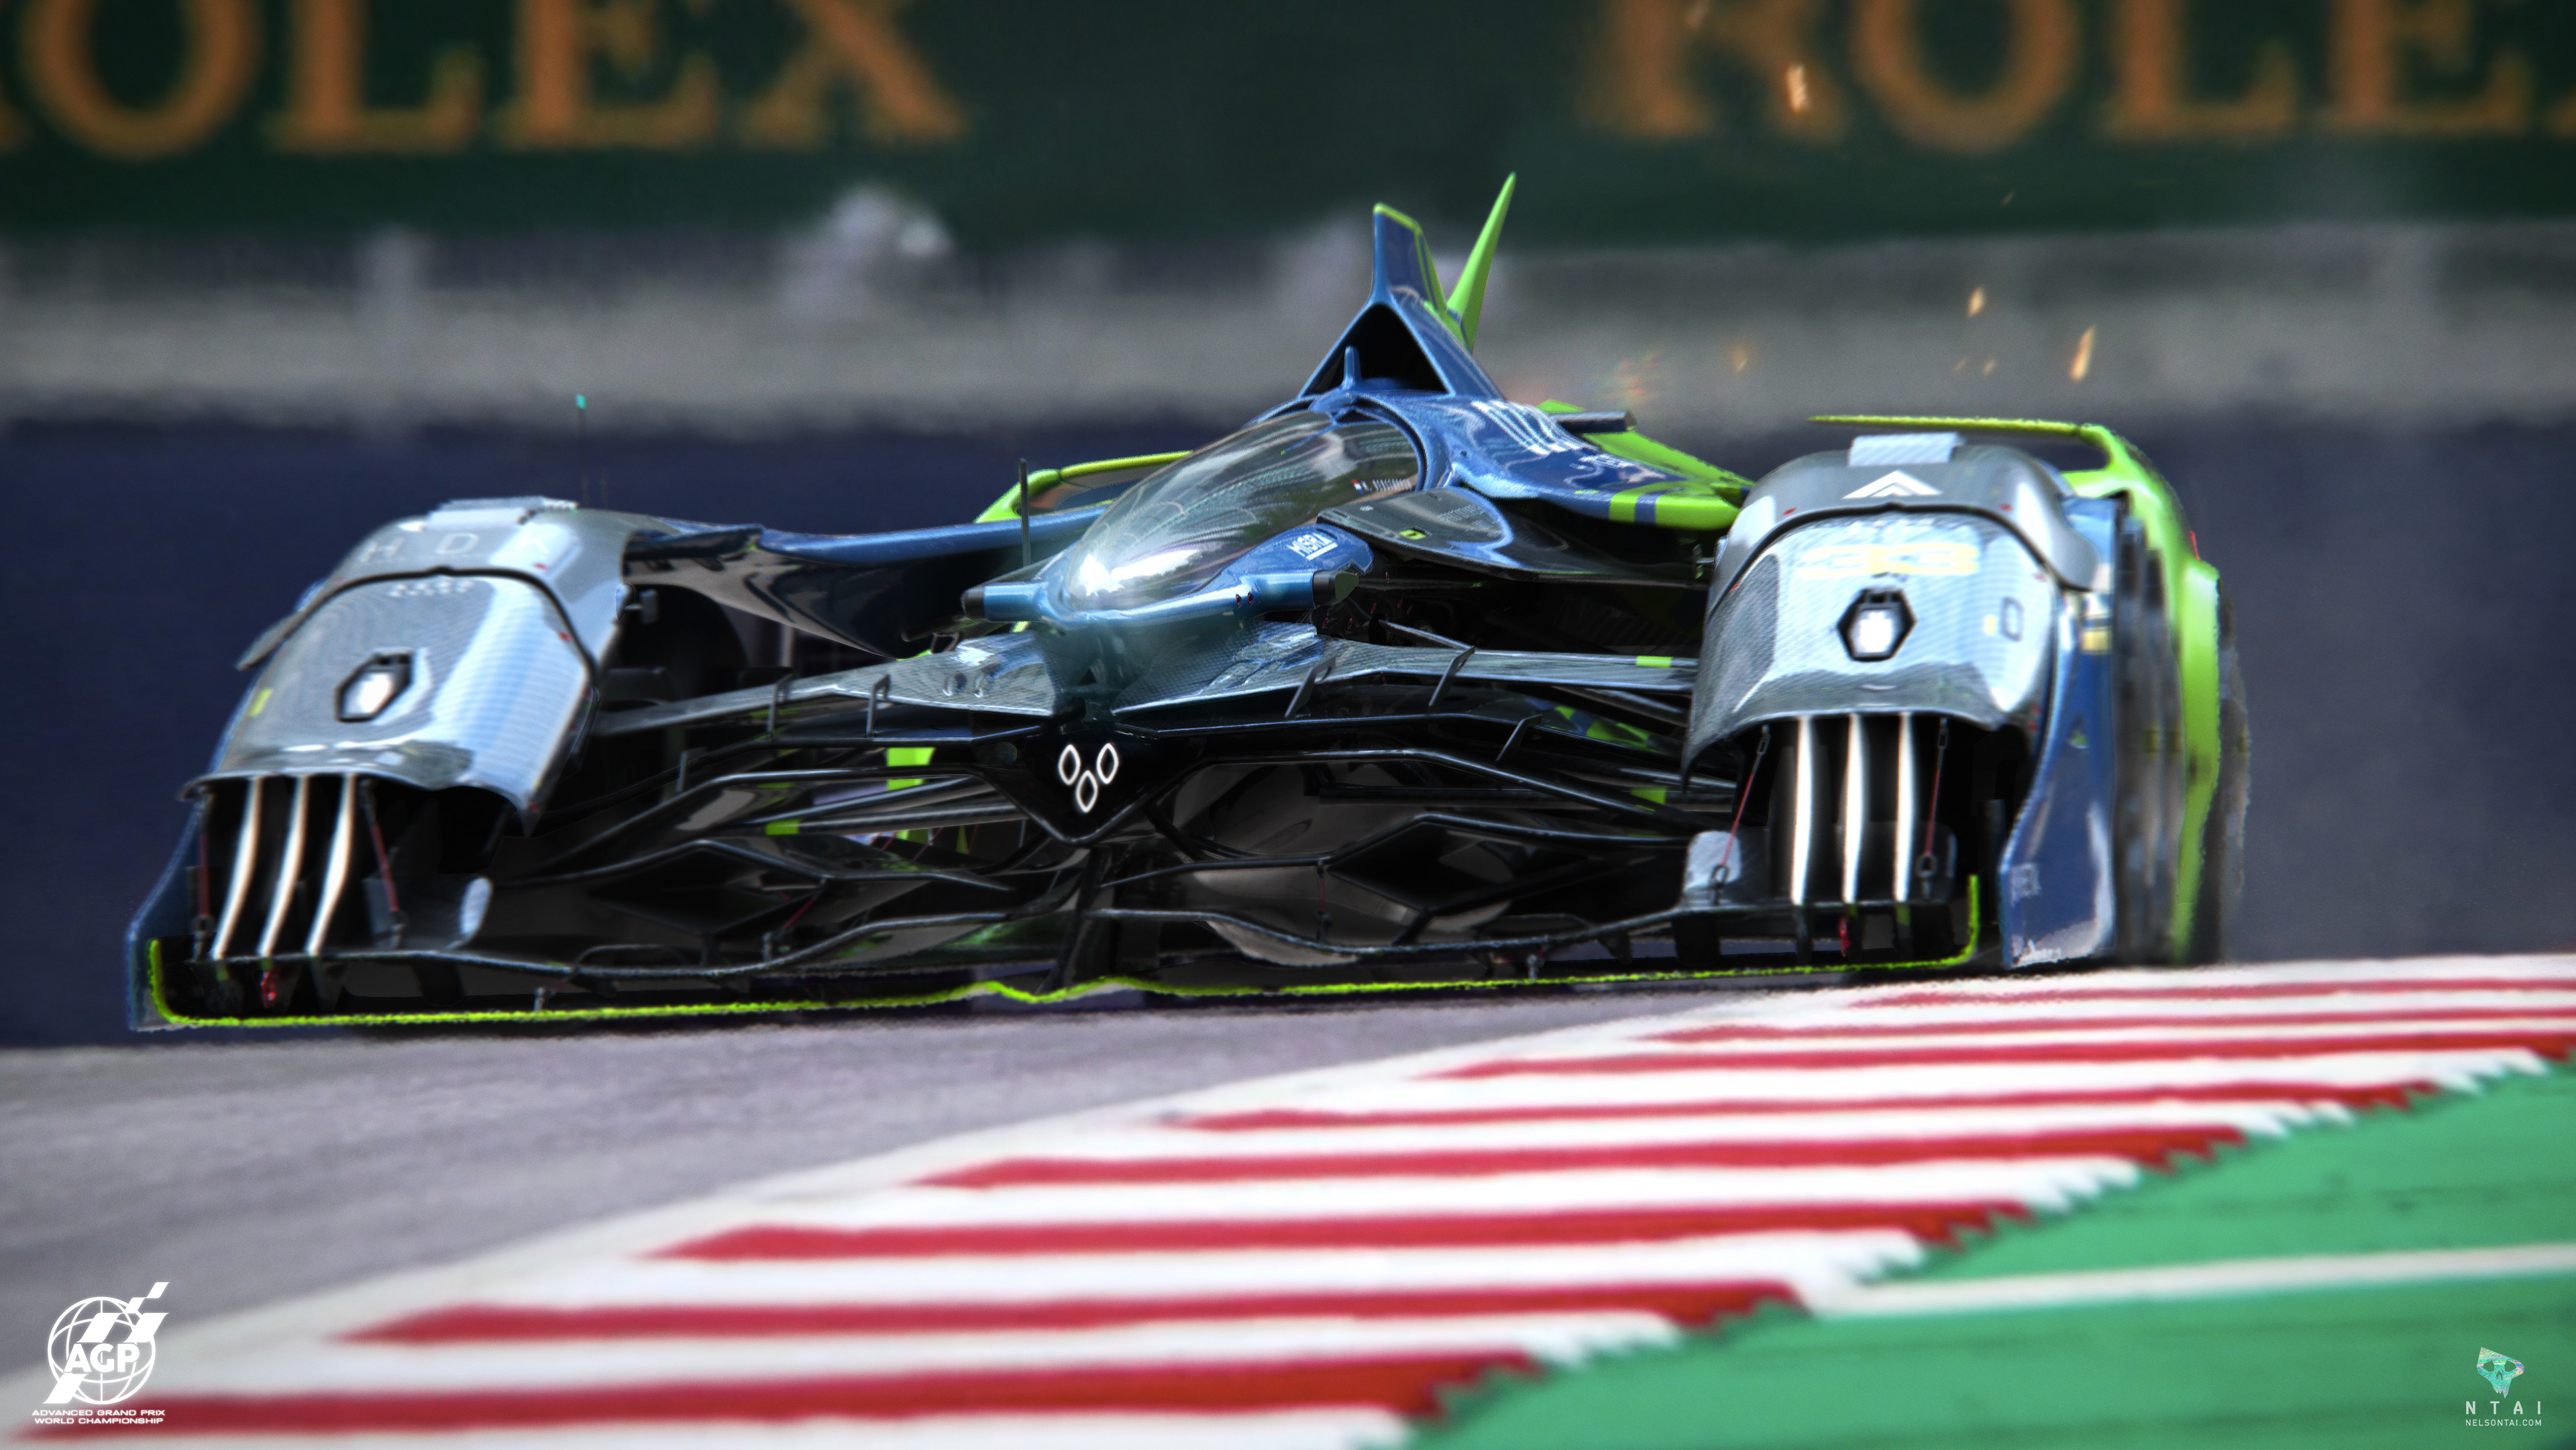 PRE-SEASON TESTING :: 002
"Sector 1 and 2's pace has been unbelievable!"